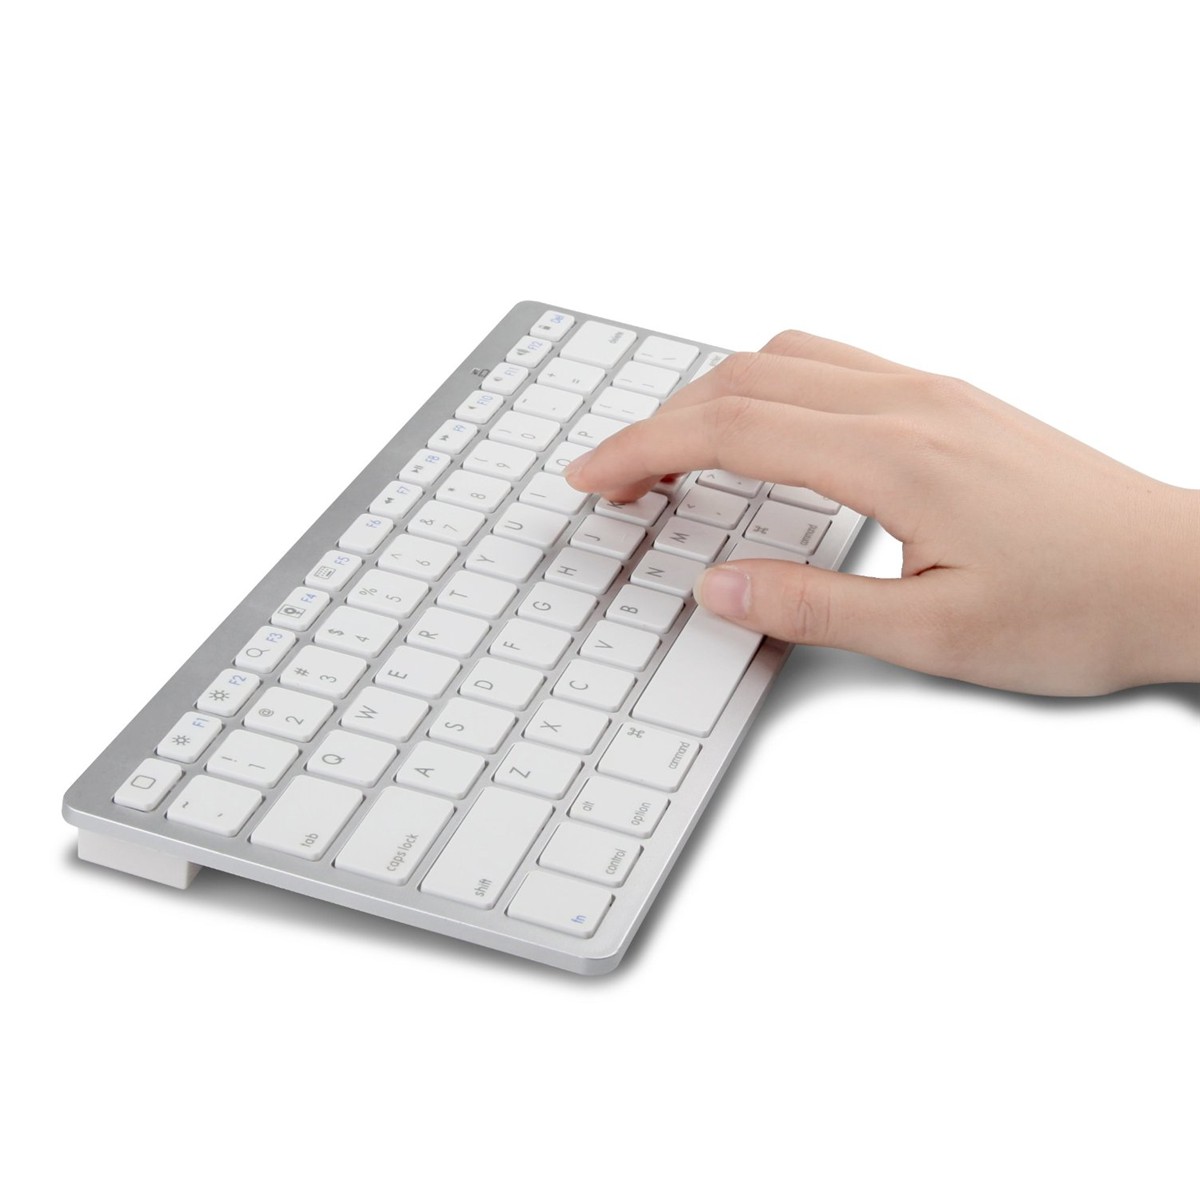 Bluetooth 3.0 wireless keyboard for iPhone / iPad, Android, Samsung, Tablet in White/Black color